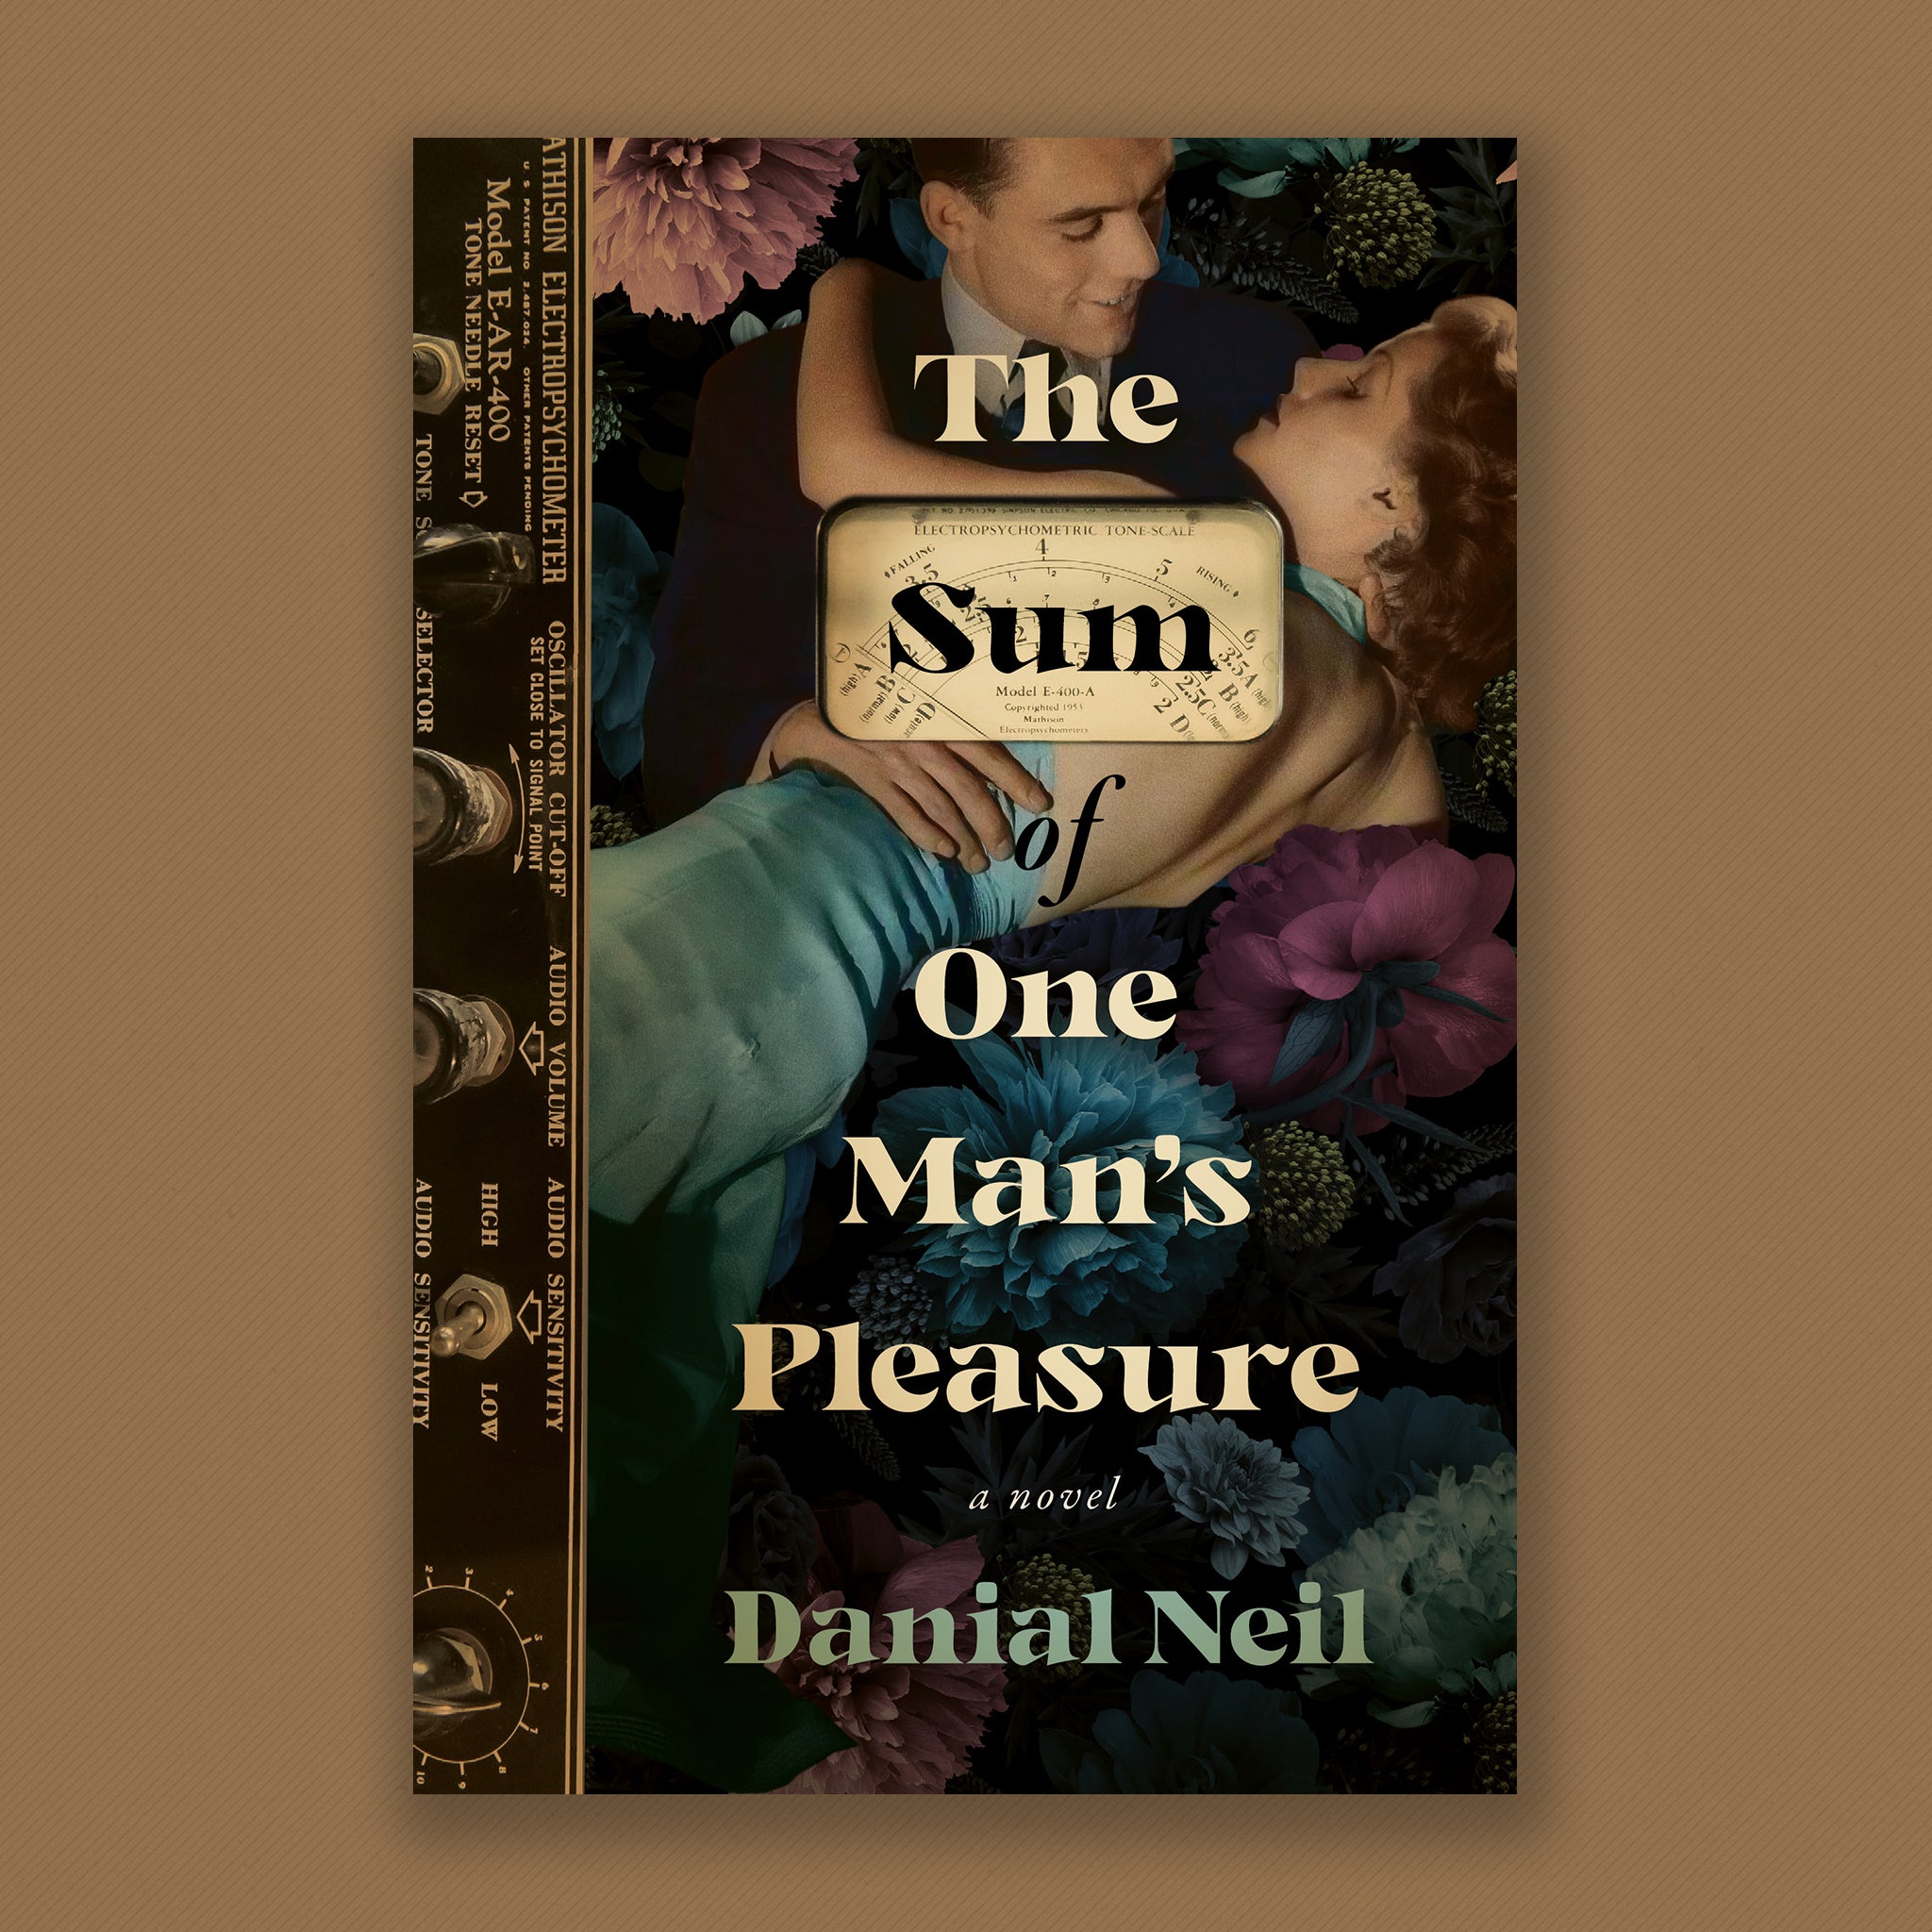 On a bed of cool-toned flowers, in collage style, sits a photograph of a man in a suite dipping a woman in a teal dress, presumably in dance. They are both highly stylized to the late 1960’s early 1950’s. Along the spine of the book, sits the dials of machine, such as a lie detector. The title sits horizontally across the page, with the word “Sum” inside a display screen for the machine along the spine. Full text reads: “The Sum of One Man’s Pleasure. A novel. Danial Neil”